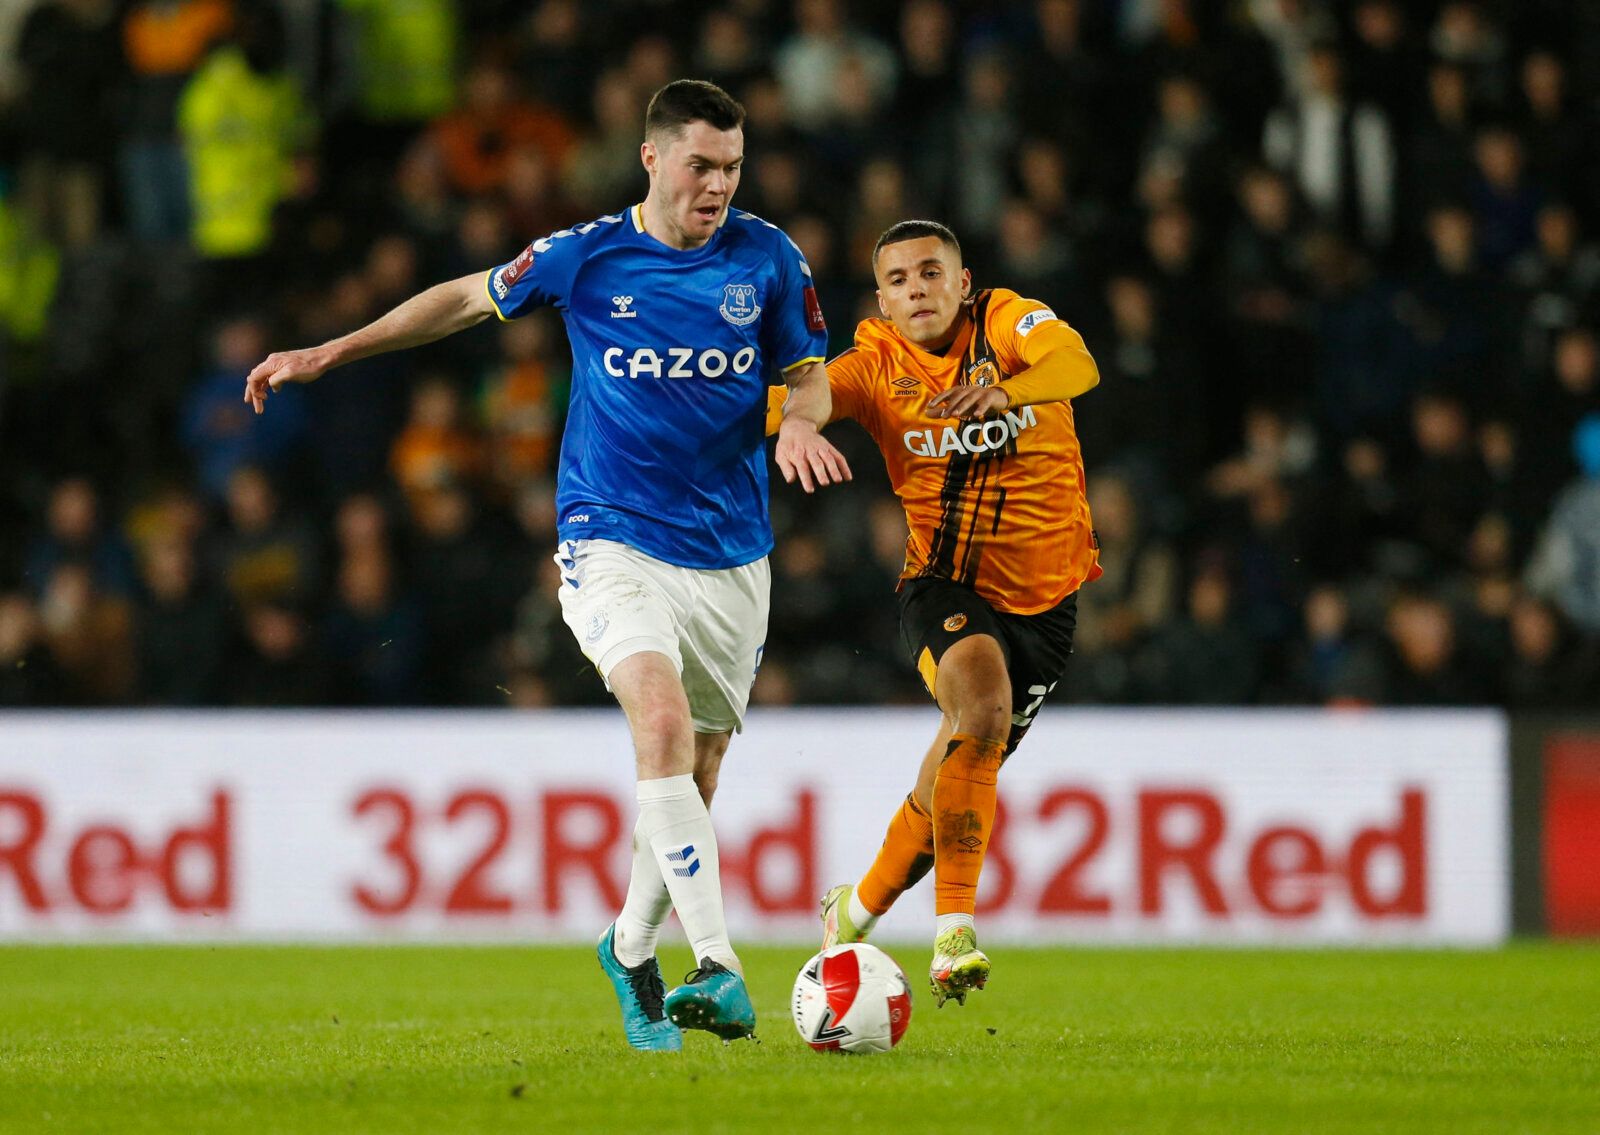 Soccer Football - FA Cup Third Round - Hull City v Everton - KCOM Stadium, Hull, Britain - January 8, 2022 Everton's Michael Keane in action with Hull City's Tyler Smith Action Images via Reuters/Ed Sykes